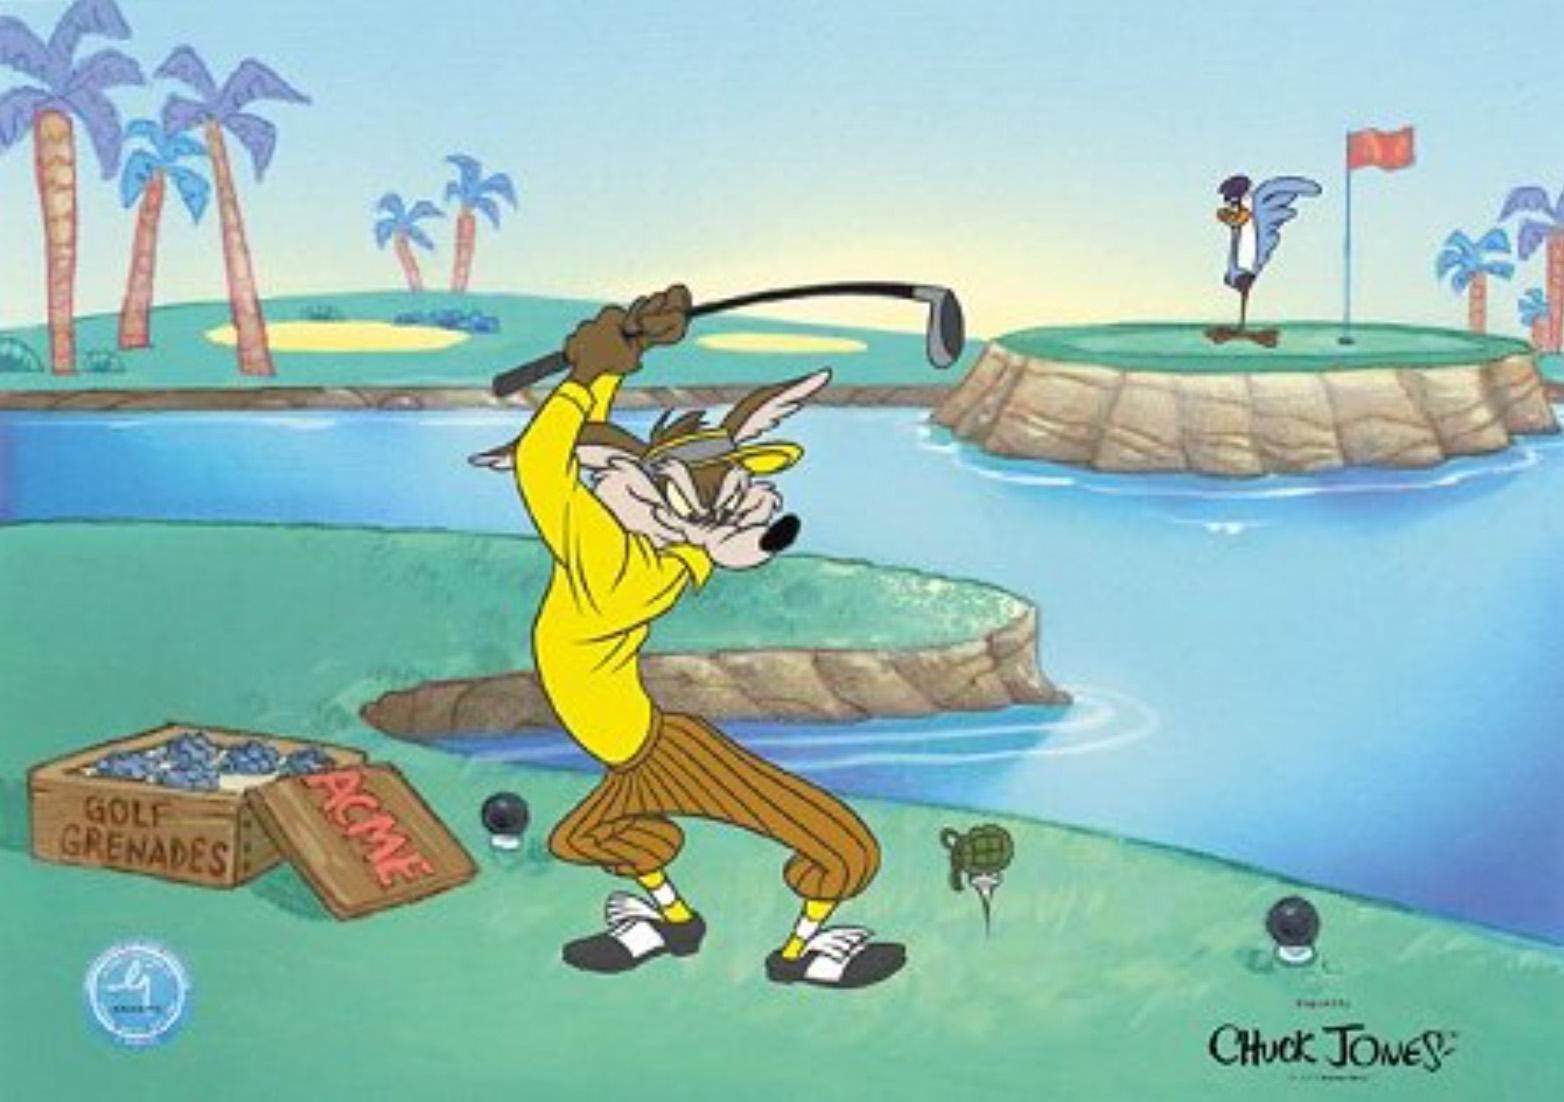 FORE! 3, 2, 1...

MEDIUM: Sericel
EDITION SIZE: 2001
SKU: SC00025

ABOUT THE IMAGE: The motivated Wile E. Coyote on a golf course aiming a black golf ball at Road Runner, who is on the grass across the water. 